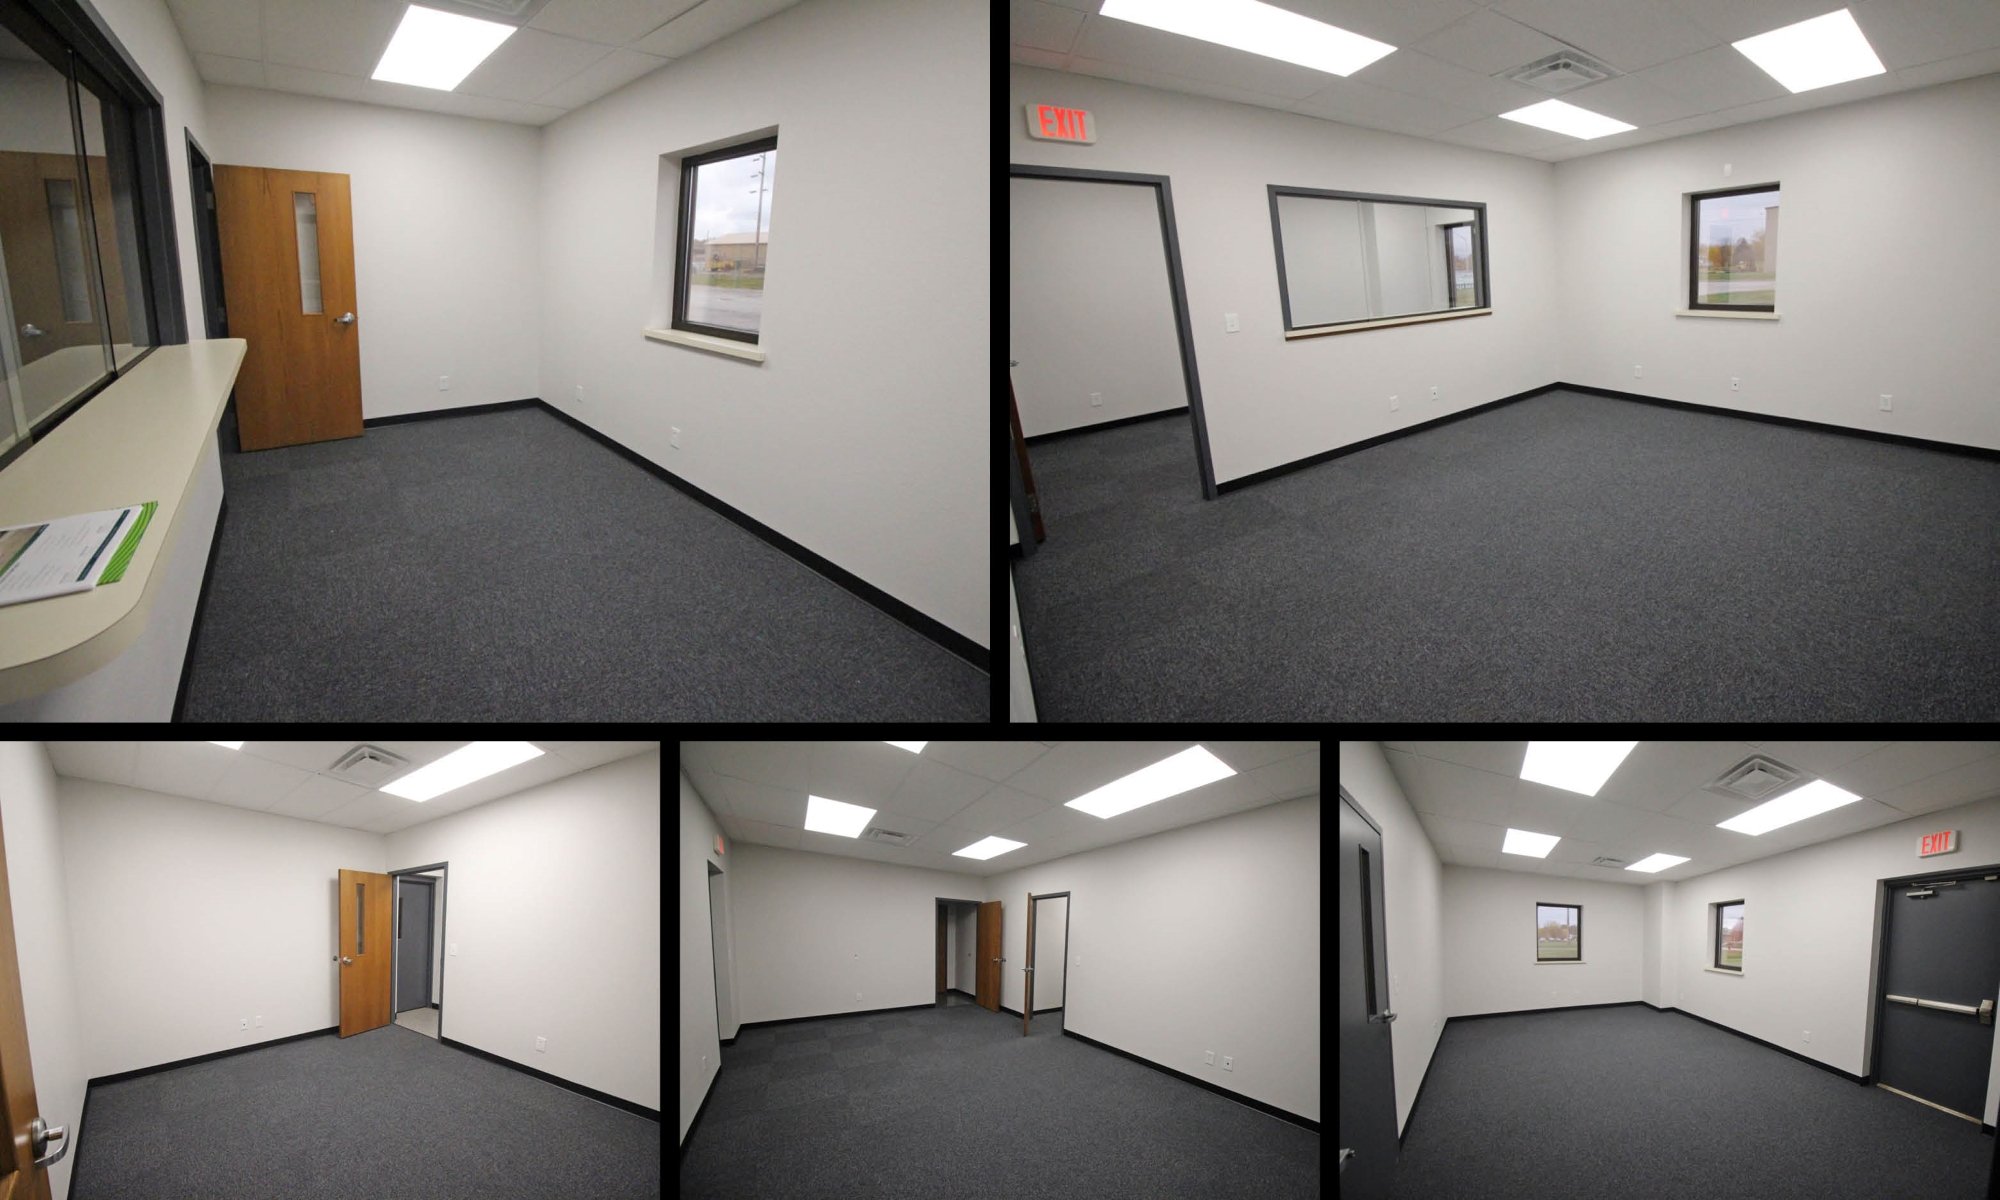 Sturges Property Group - Reception/Offices for 333 Progress Way, Avilla, IN Warehouse/Industrial